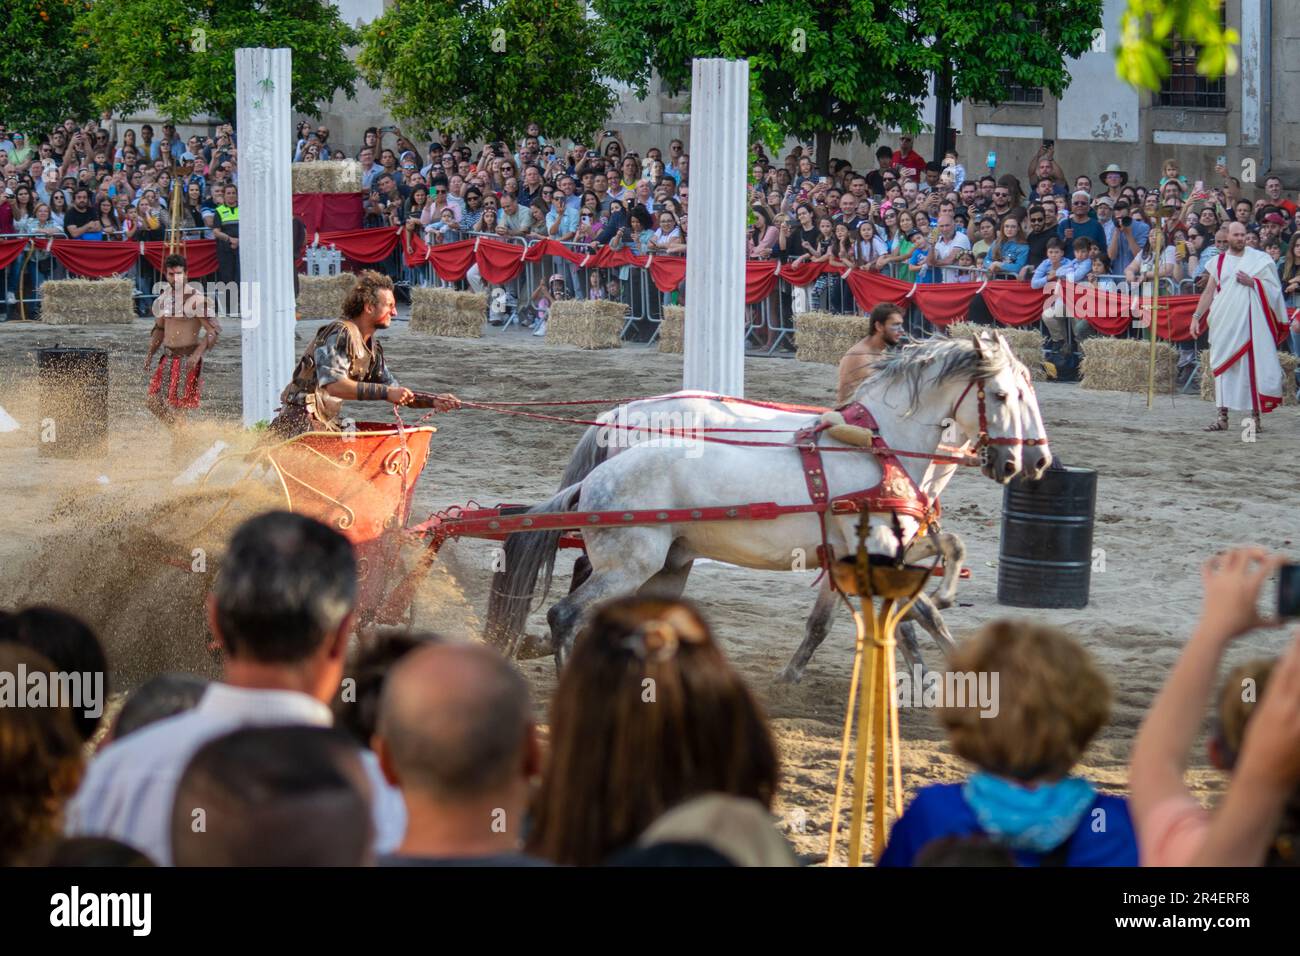 Roman gladiator race and roman gladiator fighting games. Braga Romana event in the city of Braga, at north Portugal. History and culture. Stock Photo